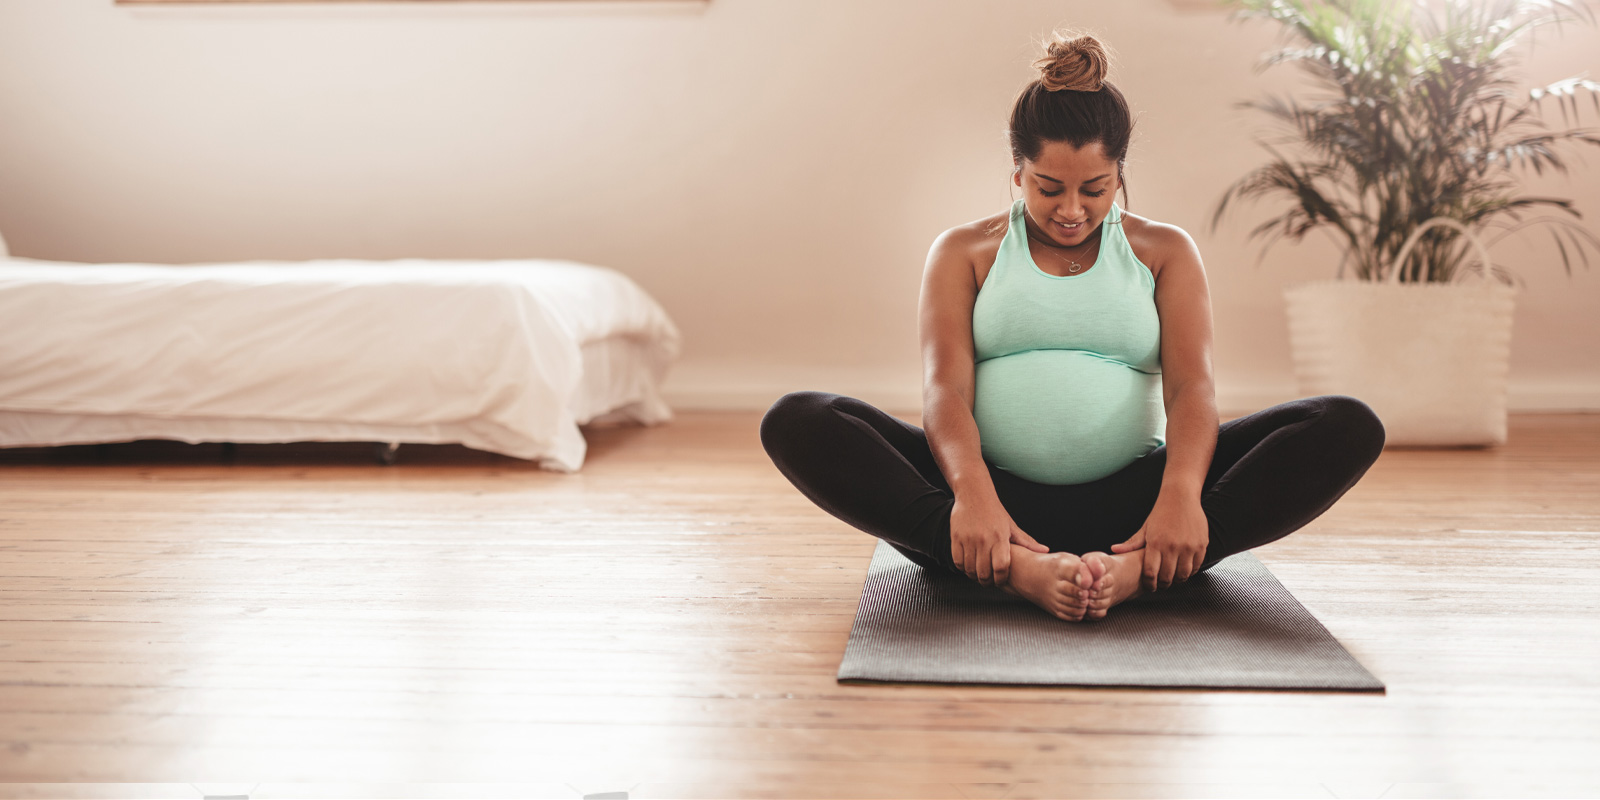 https://earlylearningnation.com/wp-content/uploads/2020/07/smiling-pregnant-person-doing-yoga.jpg